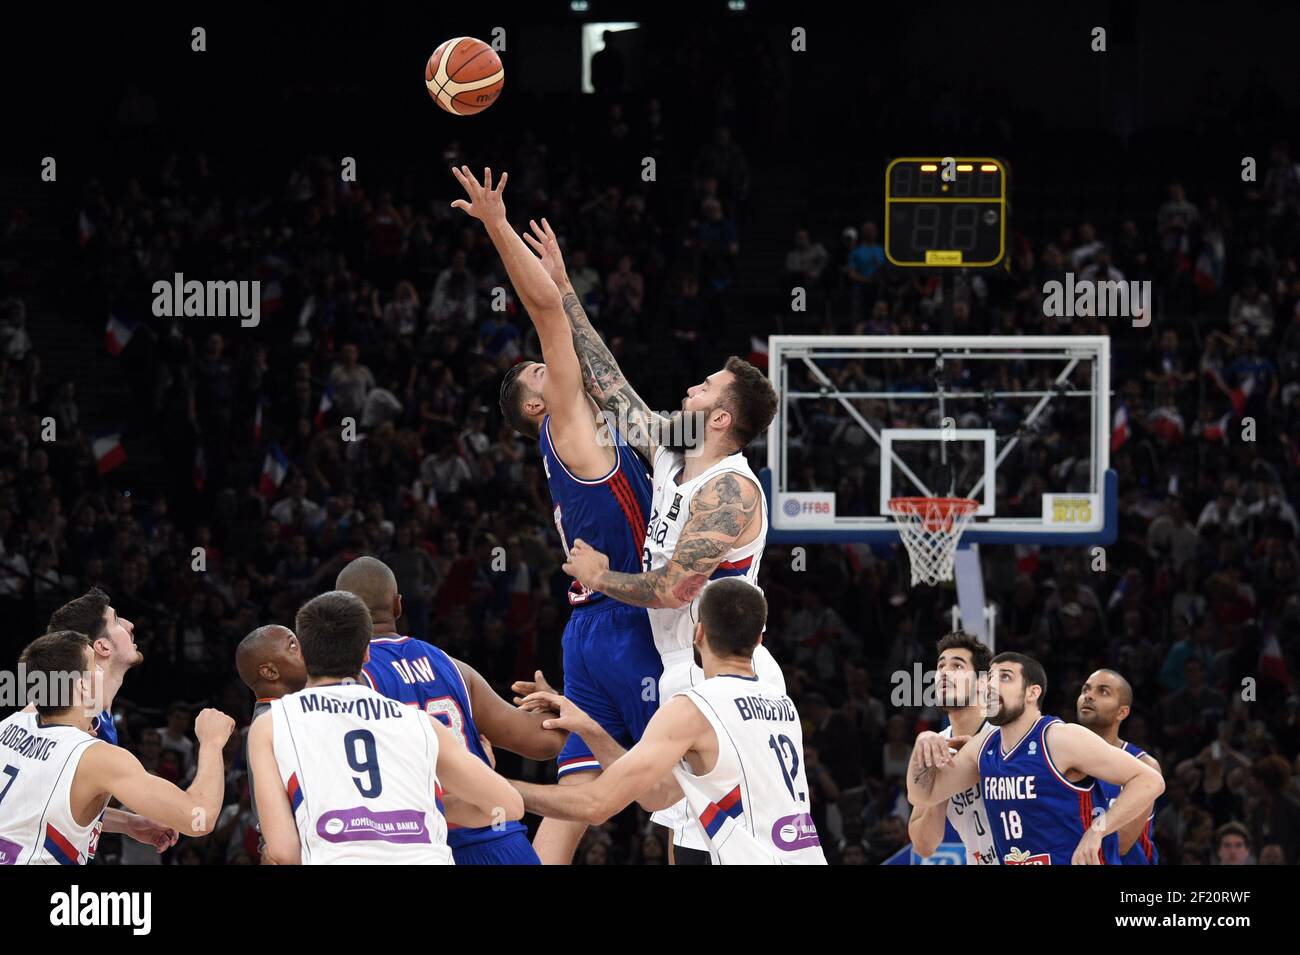 France's Joffrey Lauvergne competes during the Friendly Game Basket Ball  Match between France and Serbia, at